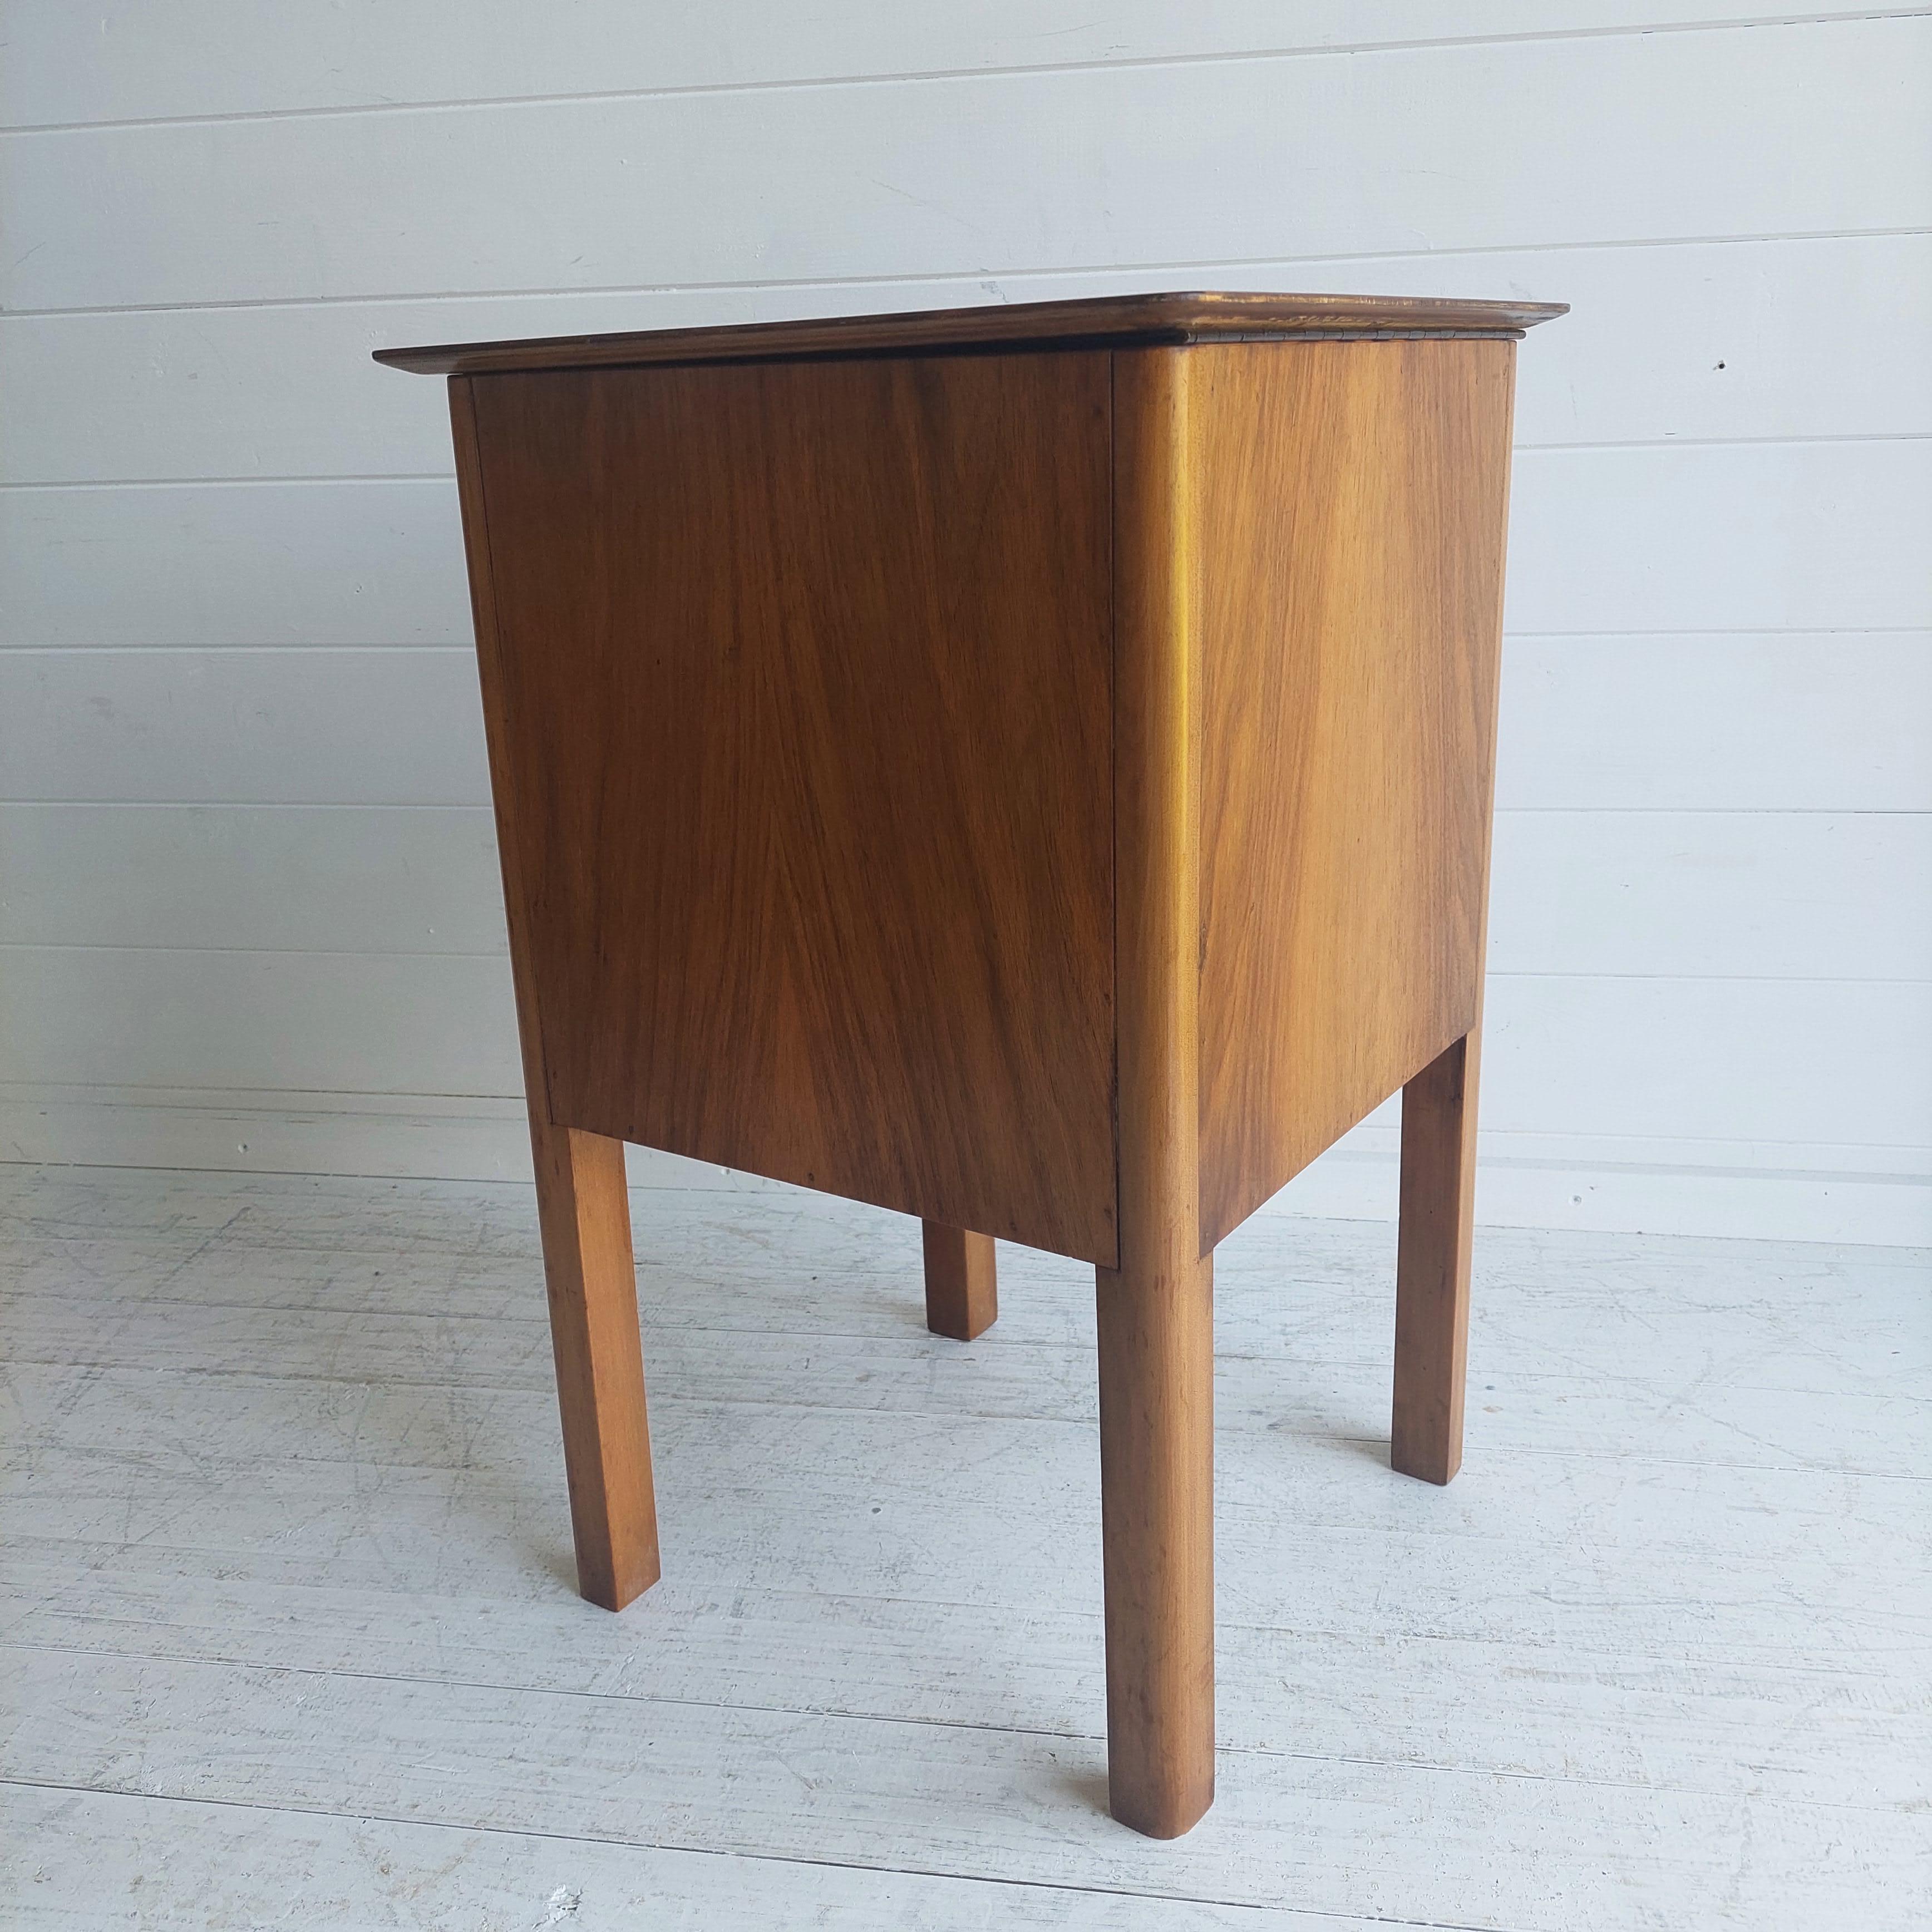 European Vintage Midcentury 40s 50s Walnut Sewing Side Table with Storage & Drawer